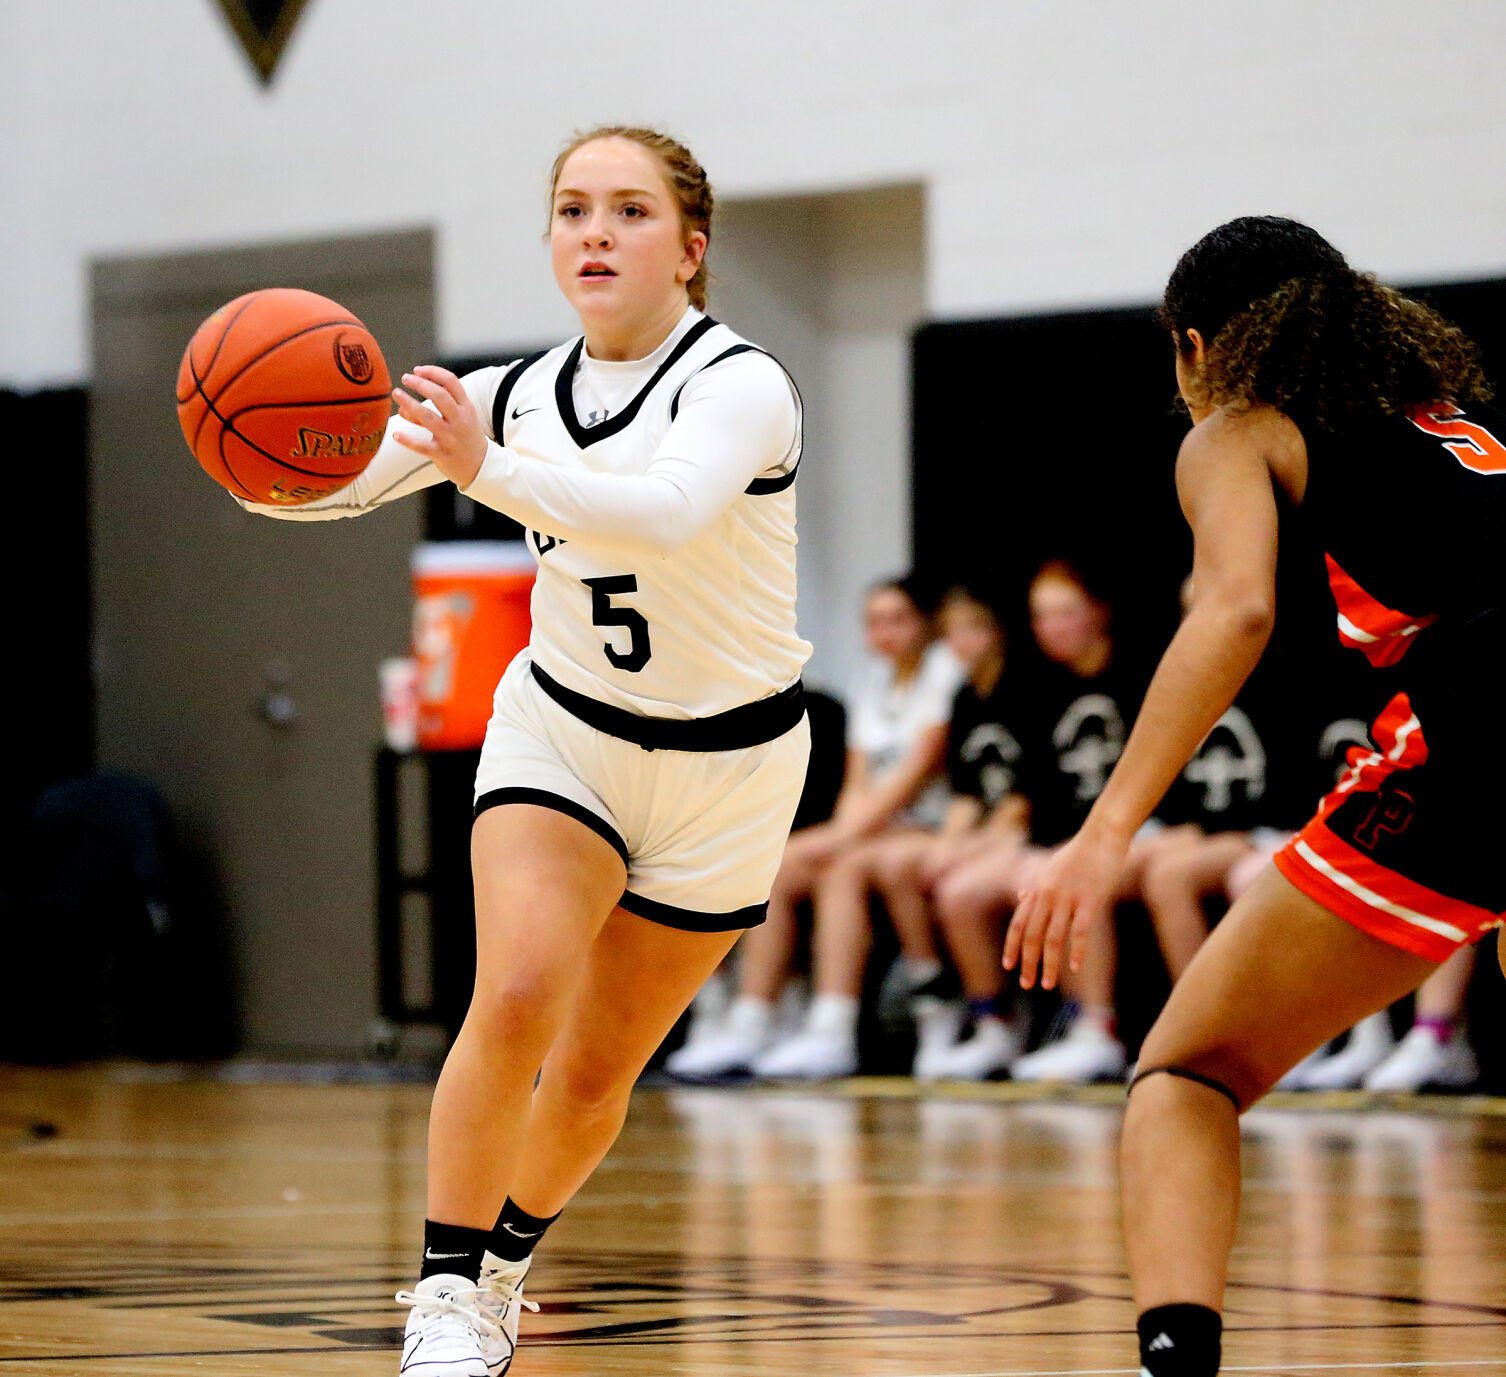 Lady Pirates Triumph in Hard-Fought Battle Against Paris, Abbigail Beard Leads the Charge with 18 Points